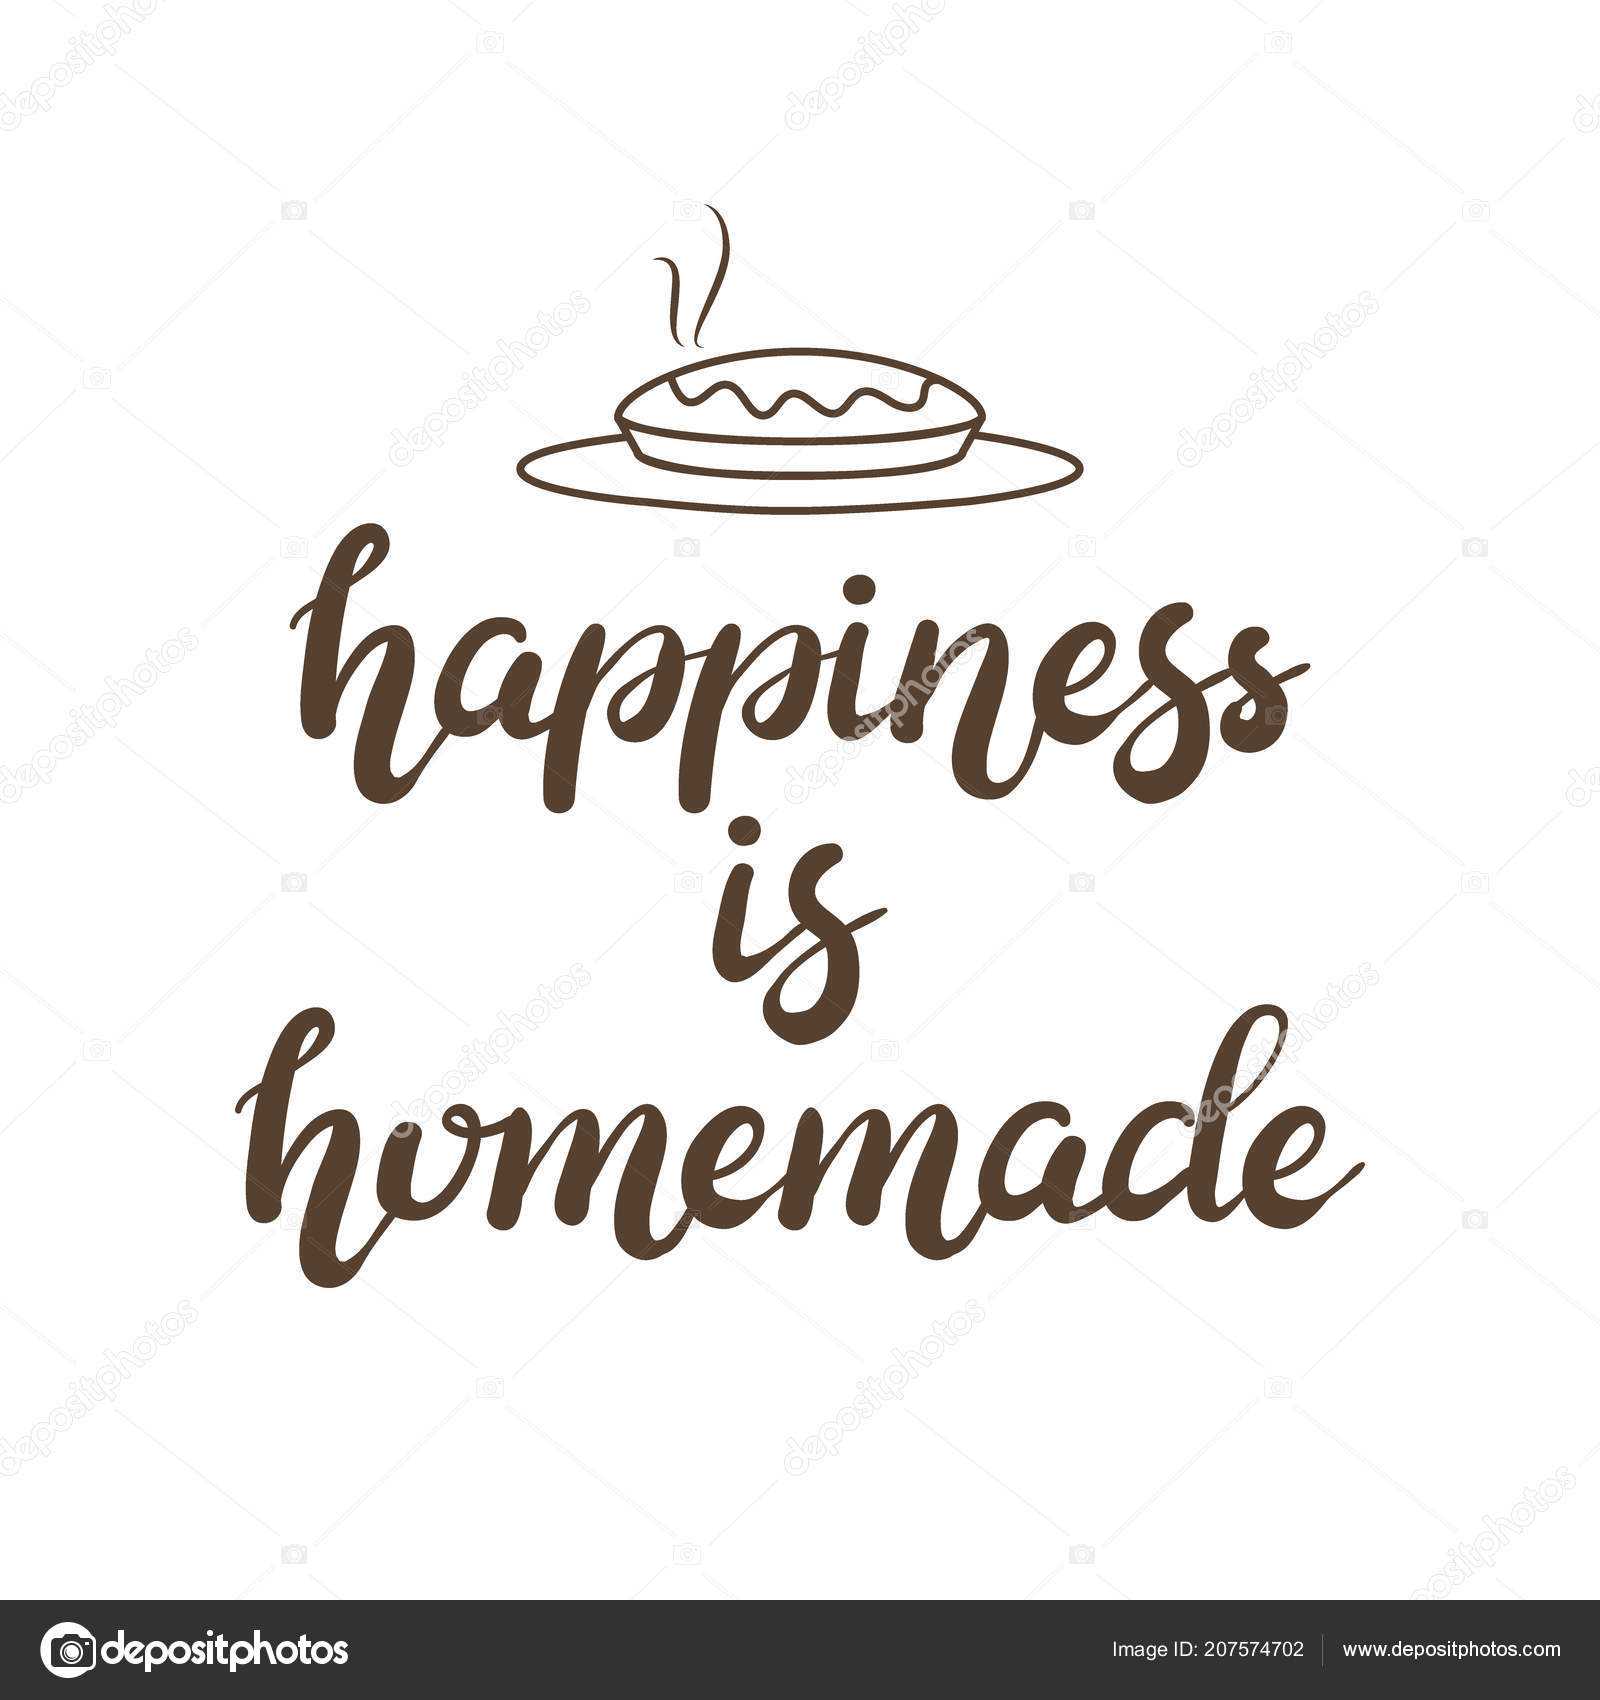 Homemade Banner Template | Hand Drawn Happiness Homemade Within Homemade Banner Template